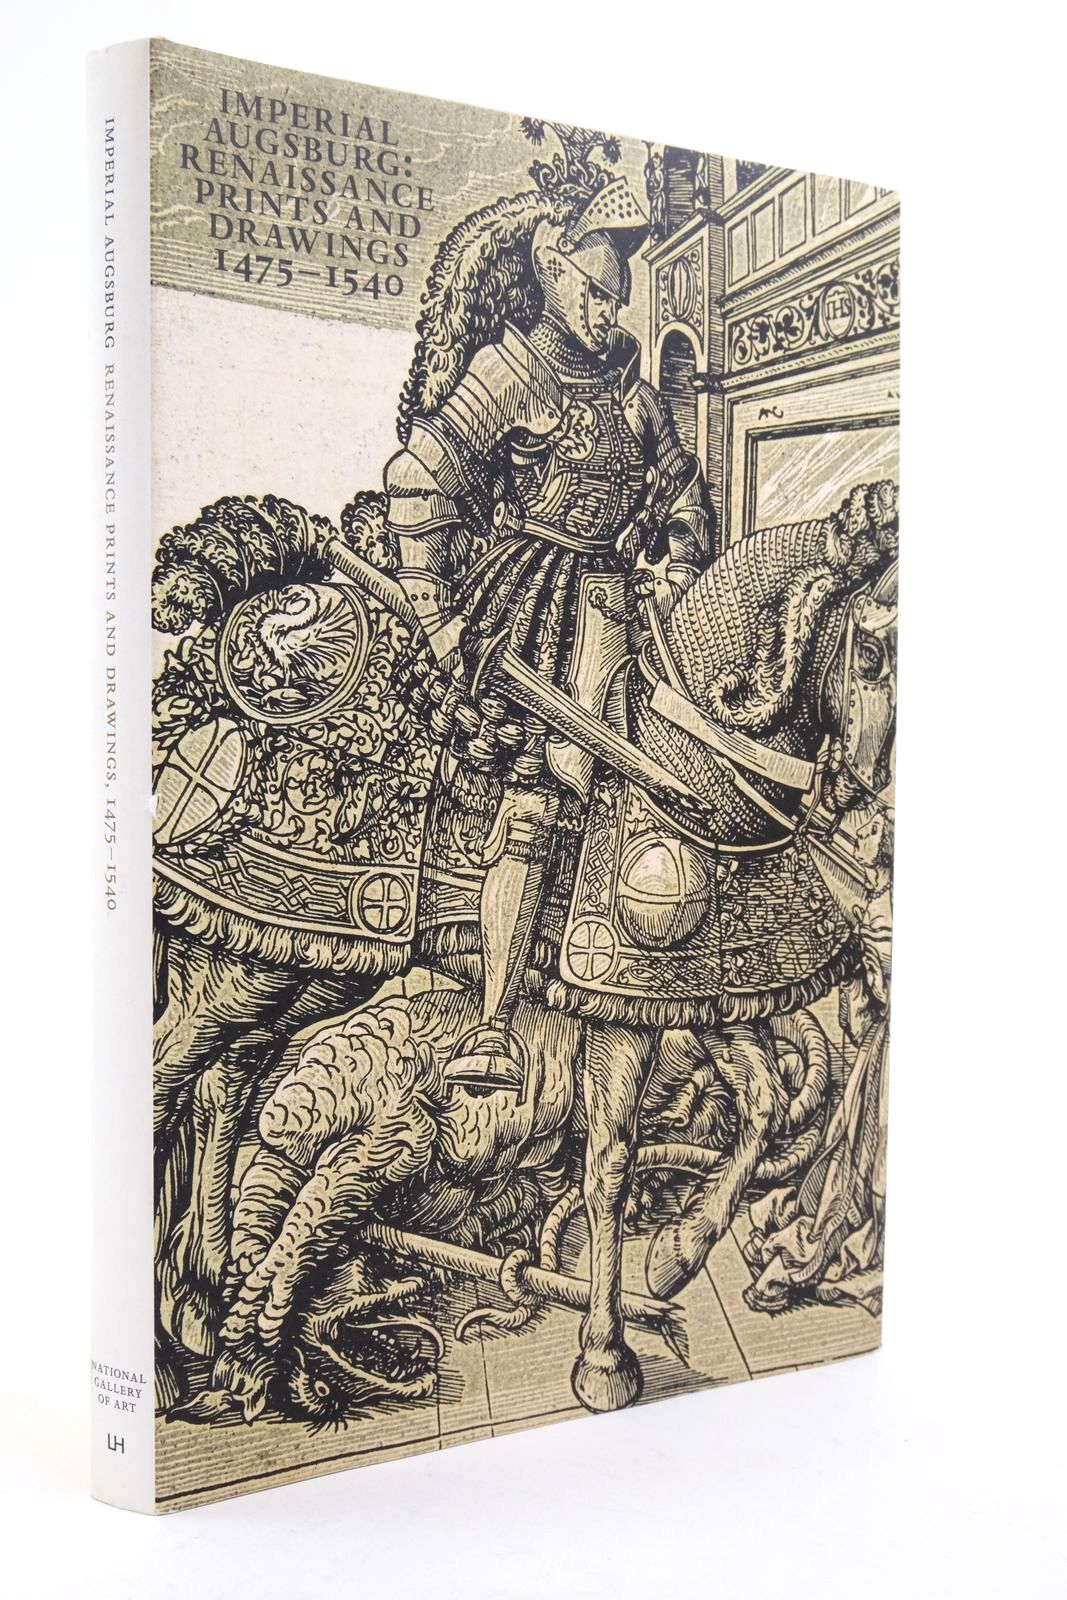 Photo of IMPERIAL AUGSBURG: RENAISSANCE PRINTS AND DRAWINGS 1475-1540 written by Jecmen, Gregory Spira, Freyda published by The National Gallery Of Art, Washington, Lund Humphries (STOCK CODE: 2138924)  for sale by Stella & Rose's Books